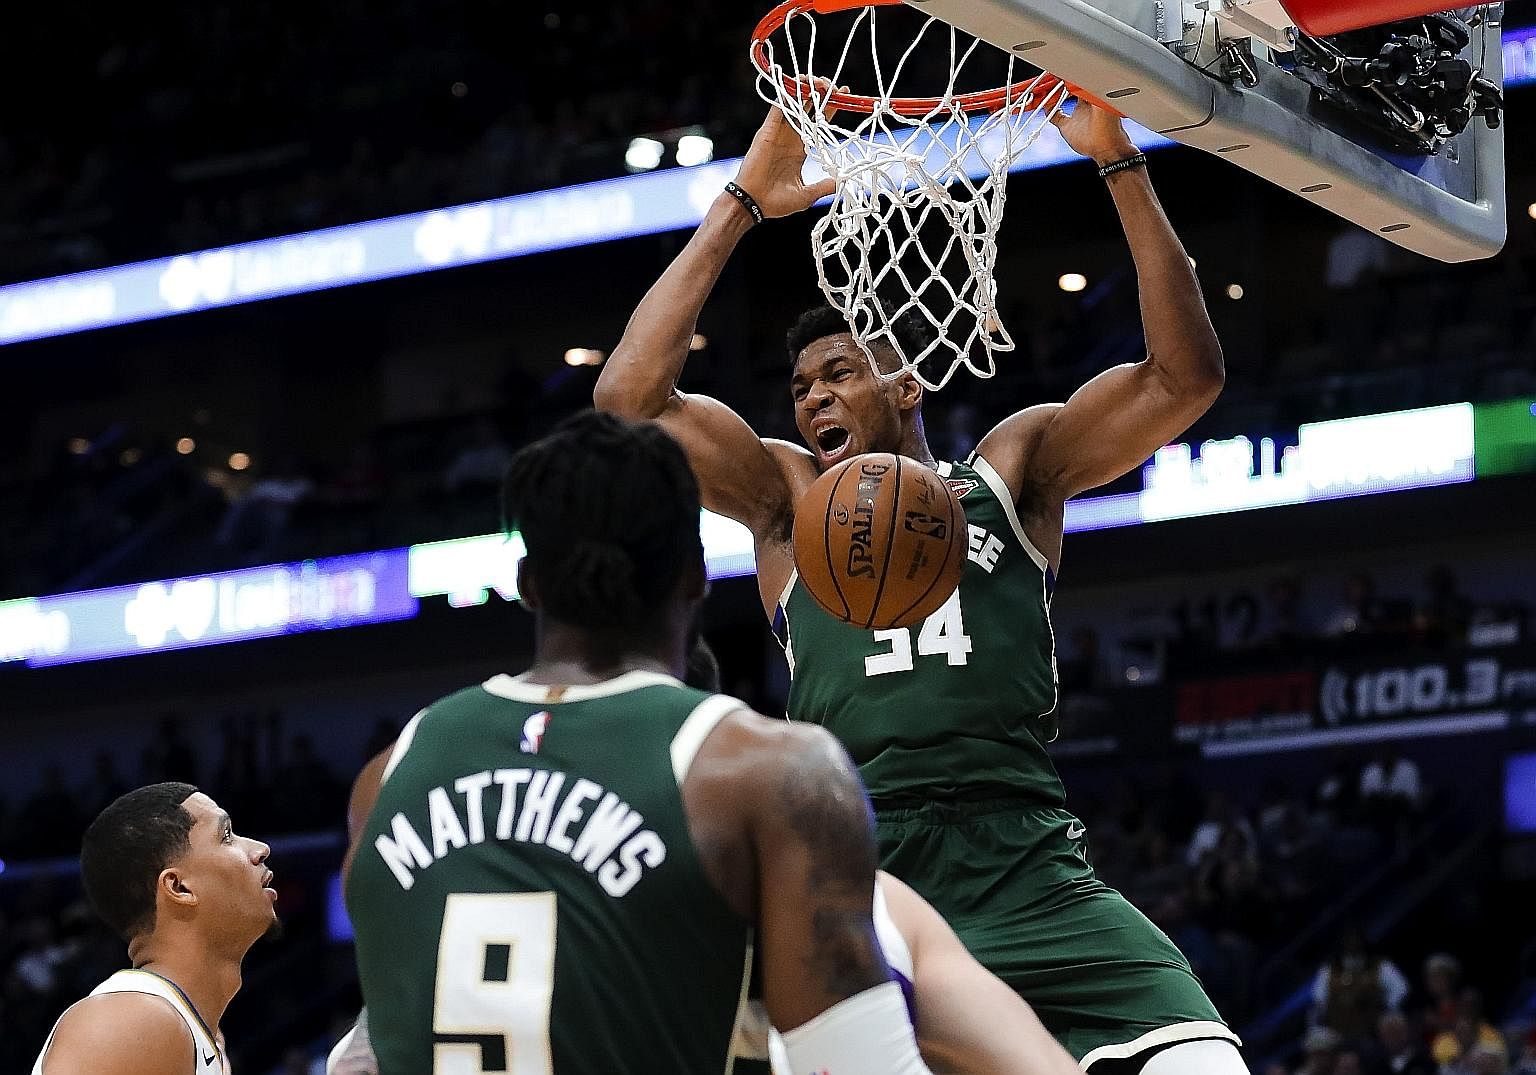 Milwaukee Bucks' 2.11m forward Giannis Antetokounmpo dunking against the New Orleans Pelicans in last week's 120-108 road win. He scored 34 points and had 17 rebounds and six assists, above his season average. PHOTO: REUTERS